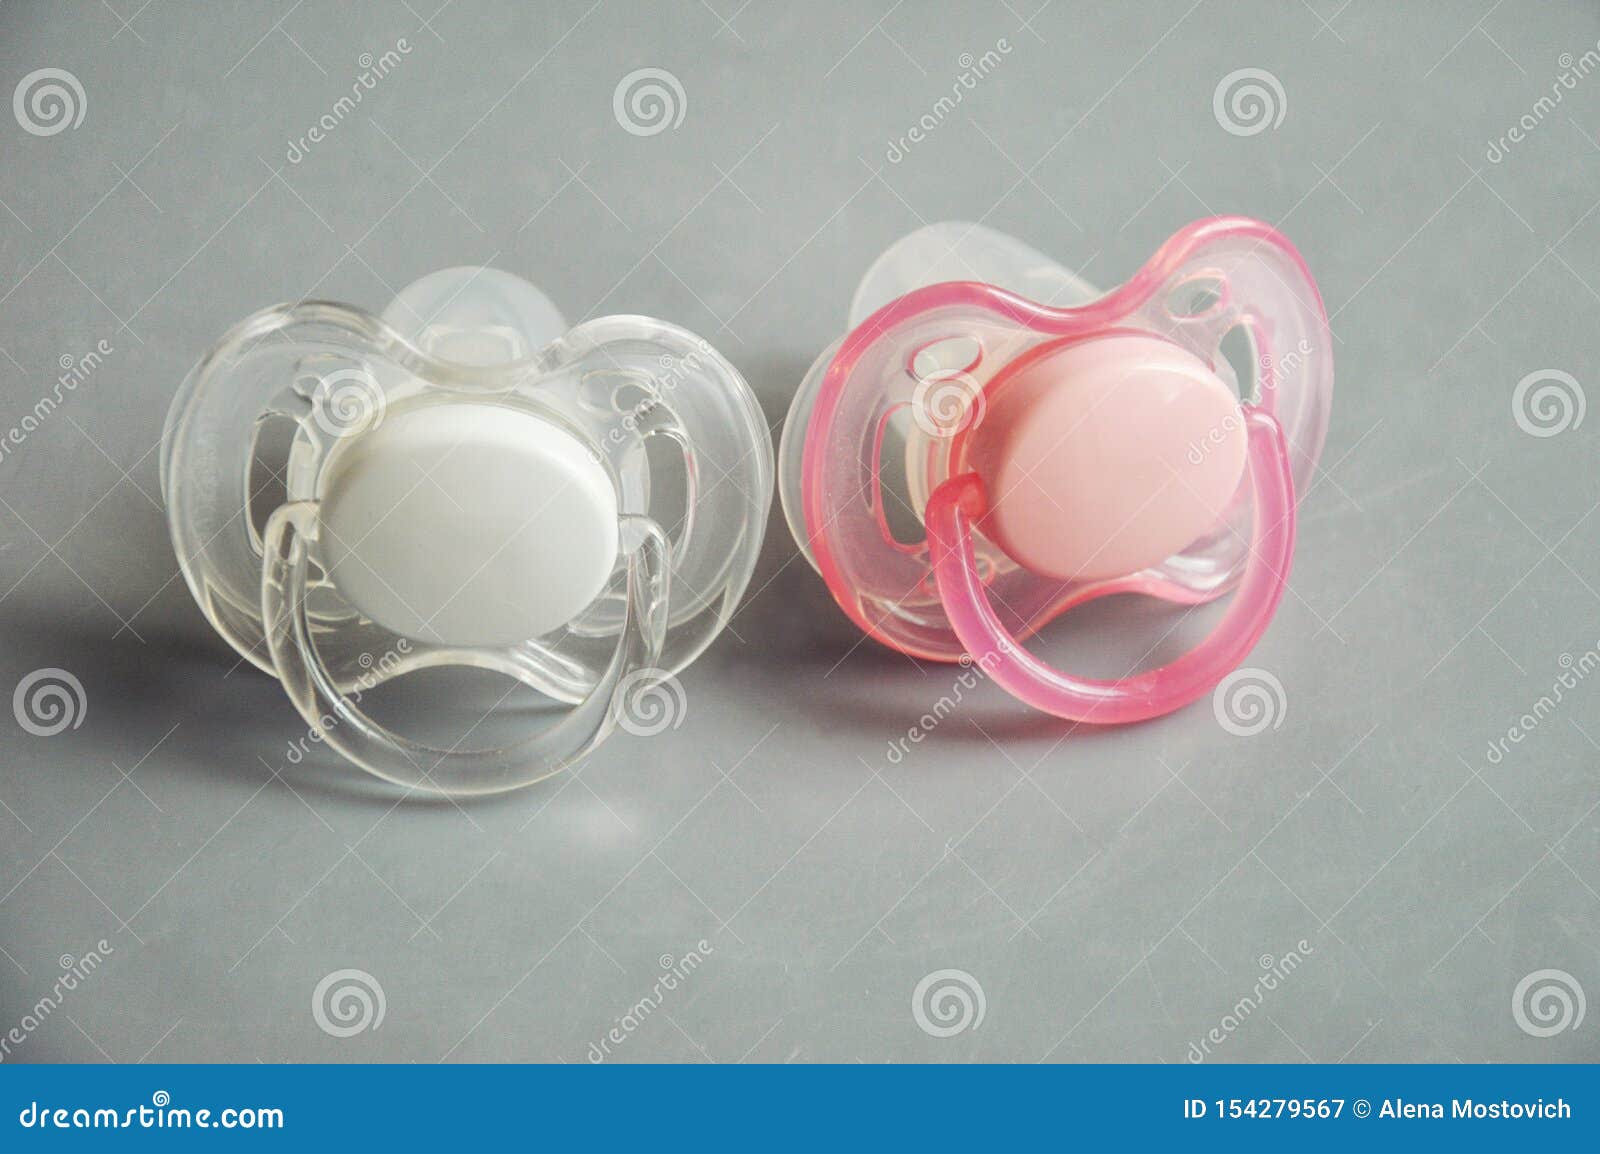 Two Baby Nipples. Pacifiers Pink and White. Stock Image - Image of ...